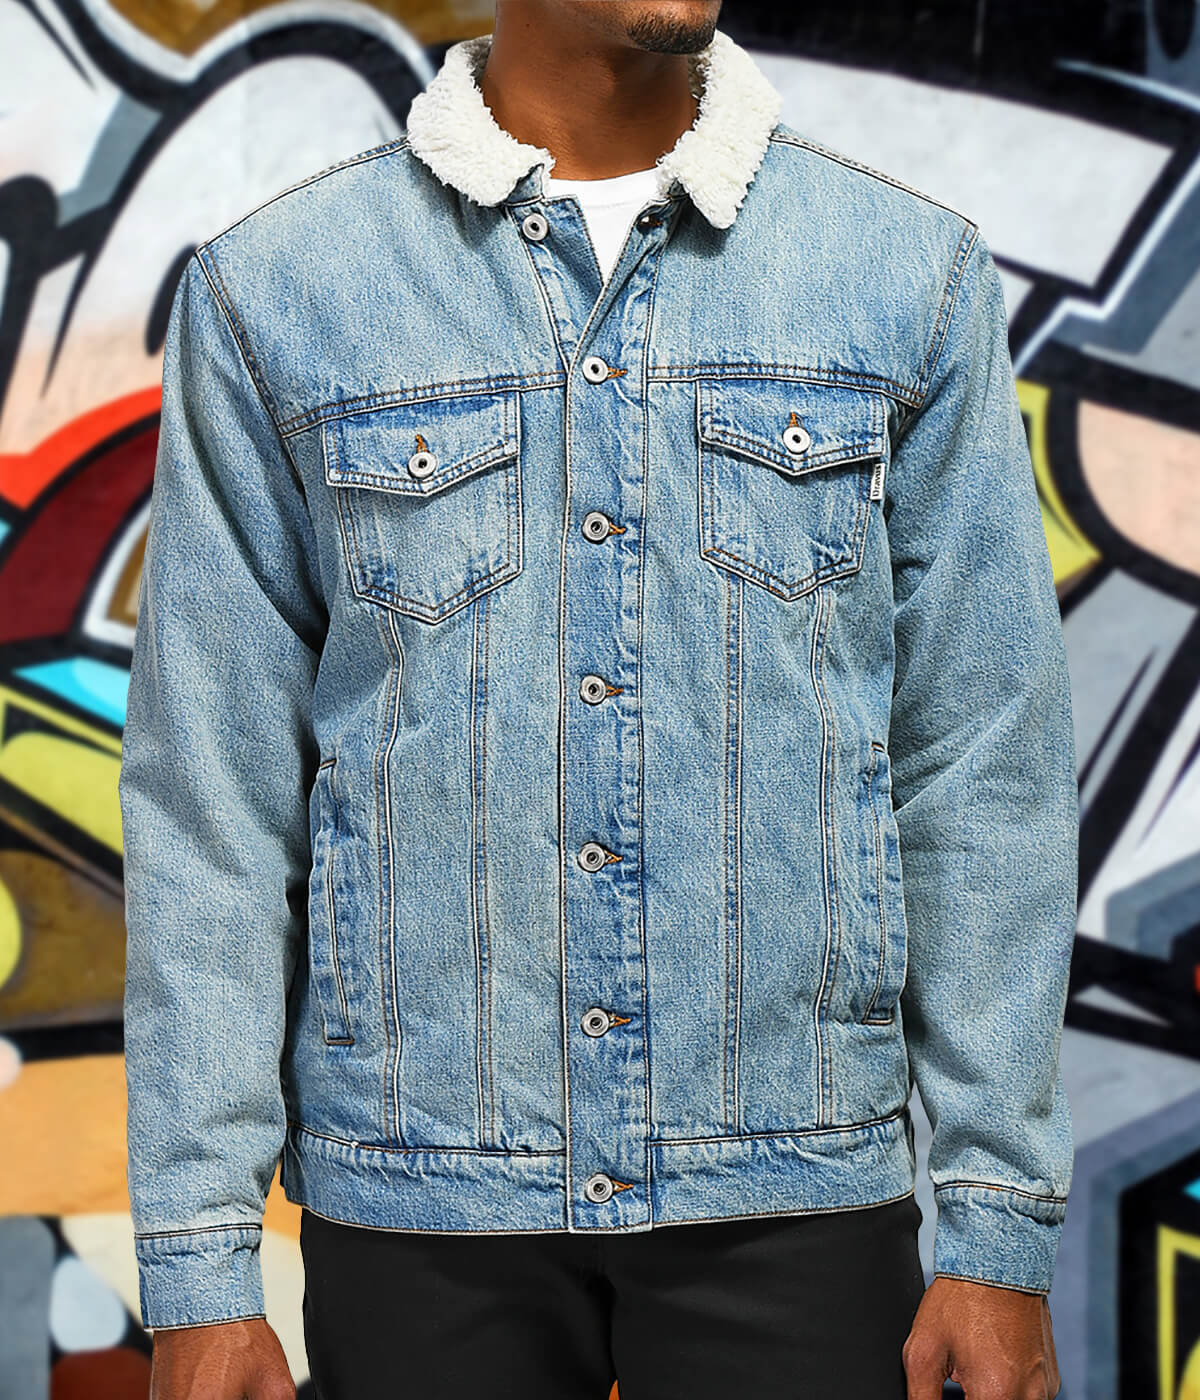 MEN'S JACKETS FEAT. DENIM SHERPA AND MORE - SHOP JACKETS